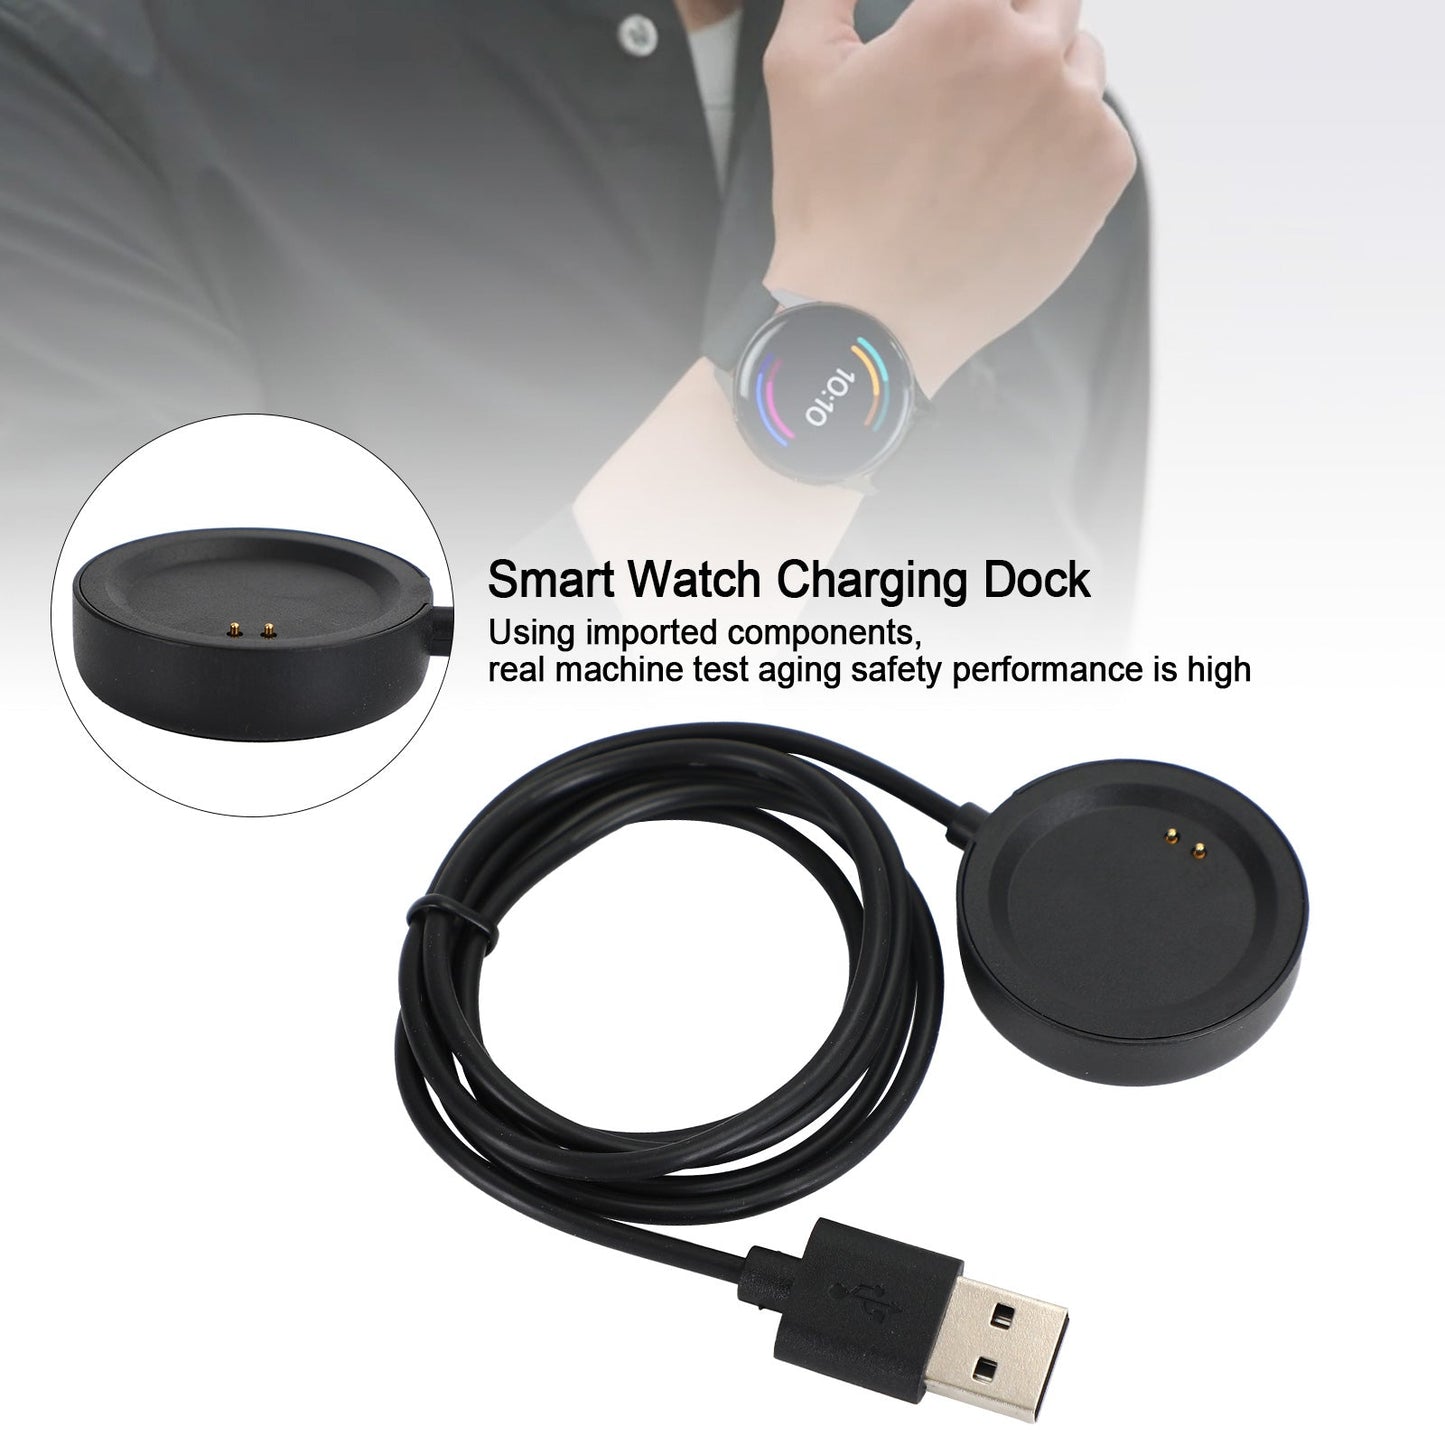 Smart Watch Charging Dock Portable Magnetic Charger For OnePlus Watch Accessorie